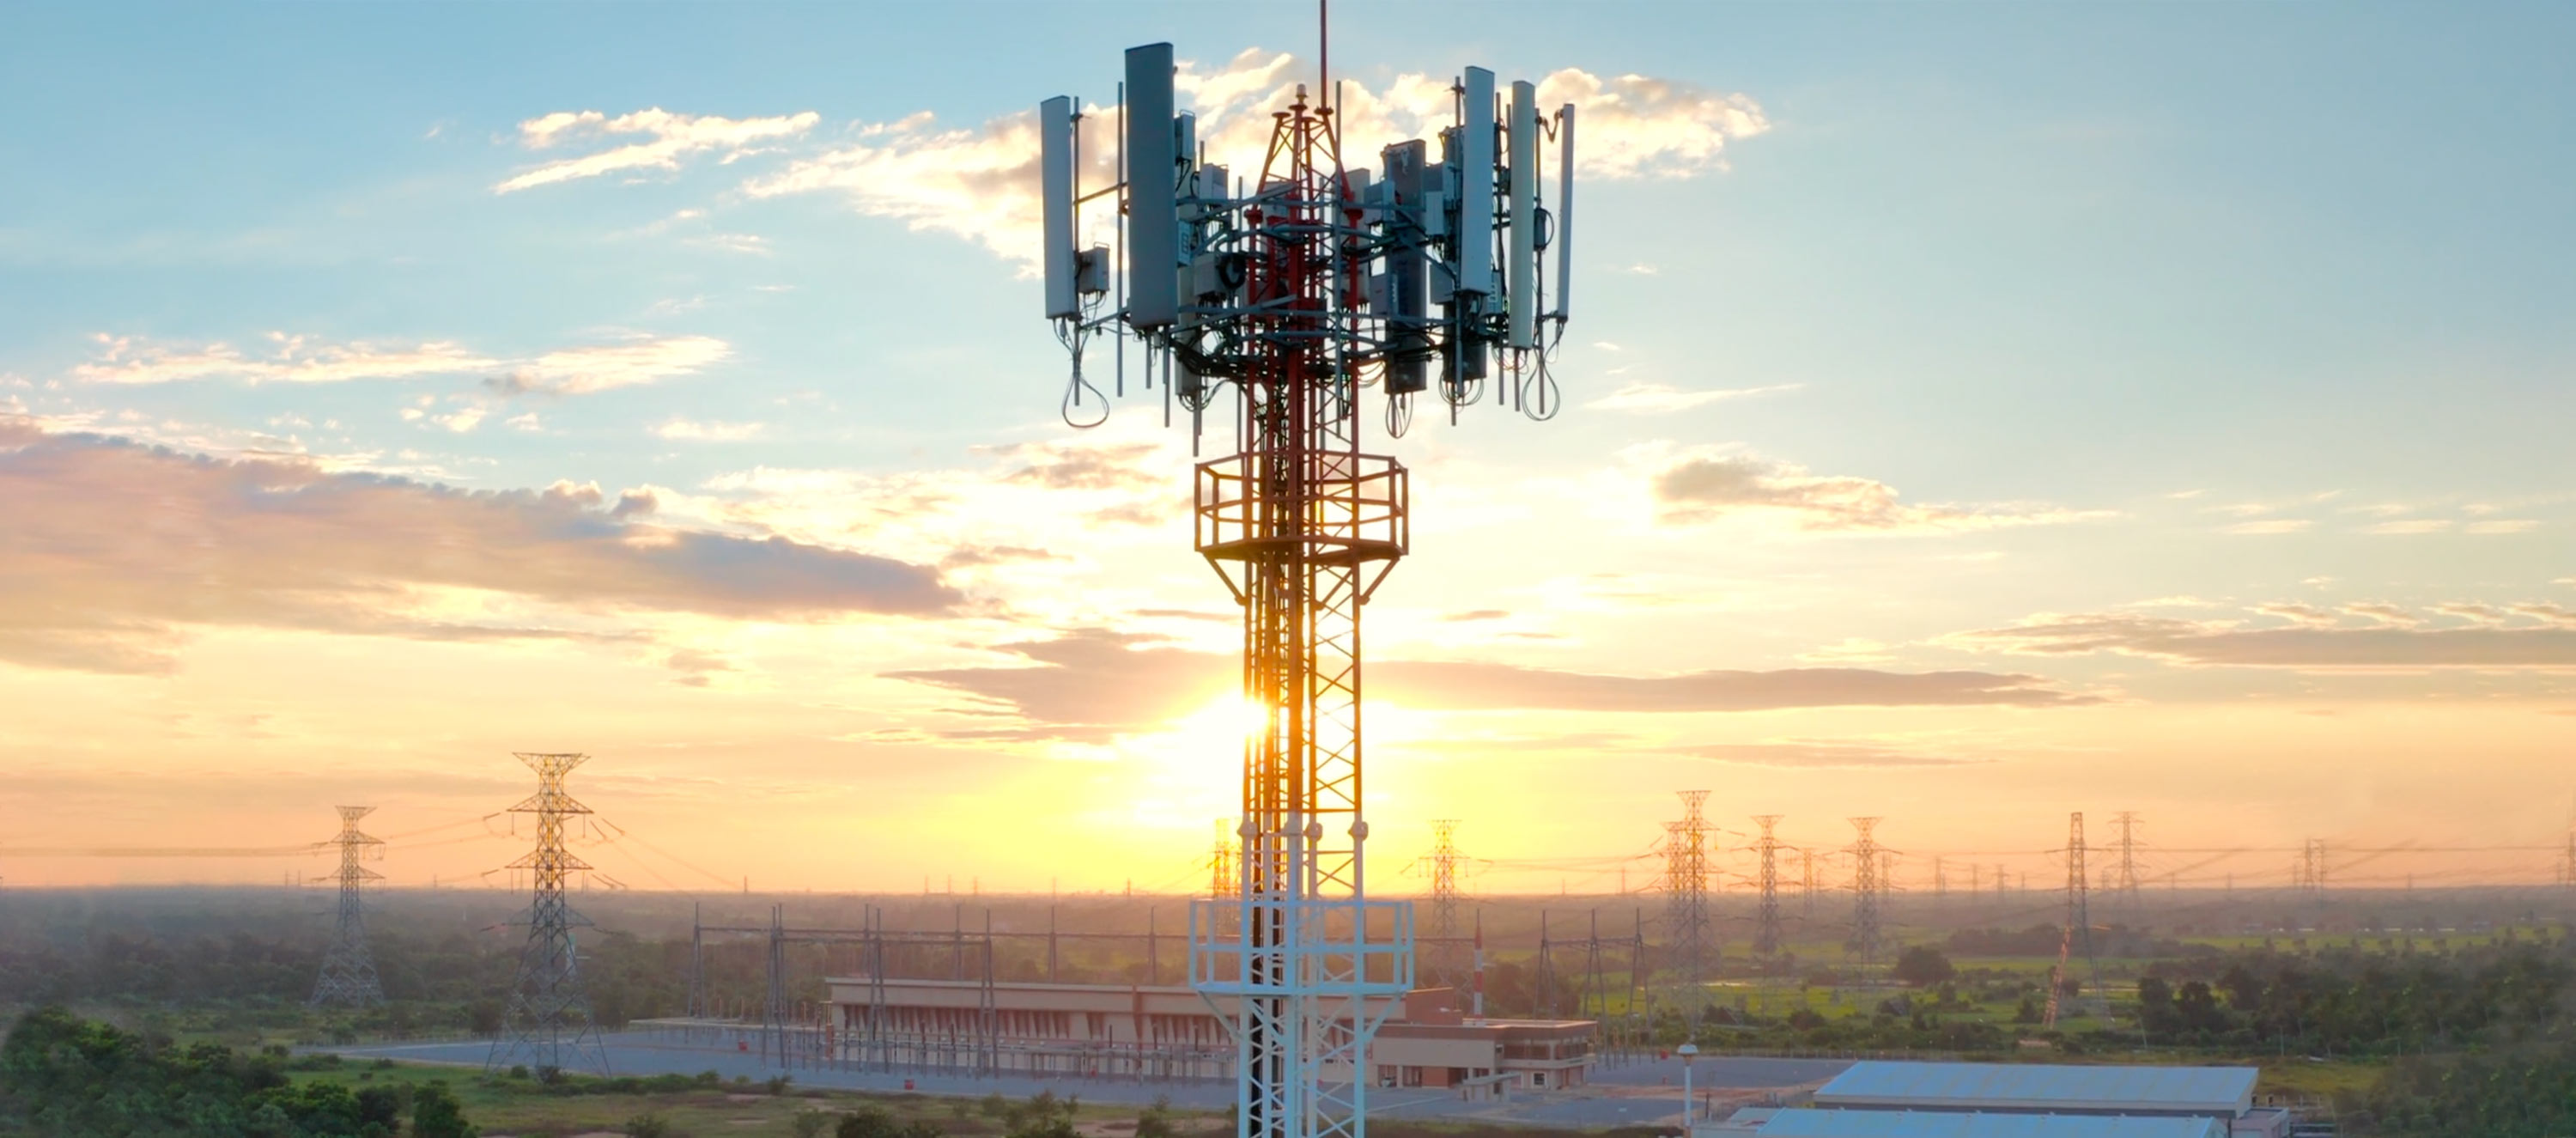 Aerial view of telecommunications cellular tower at sunset